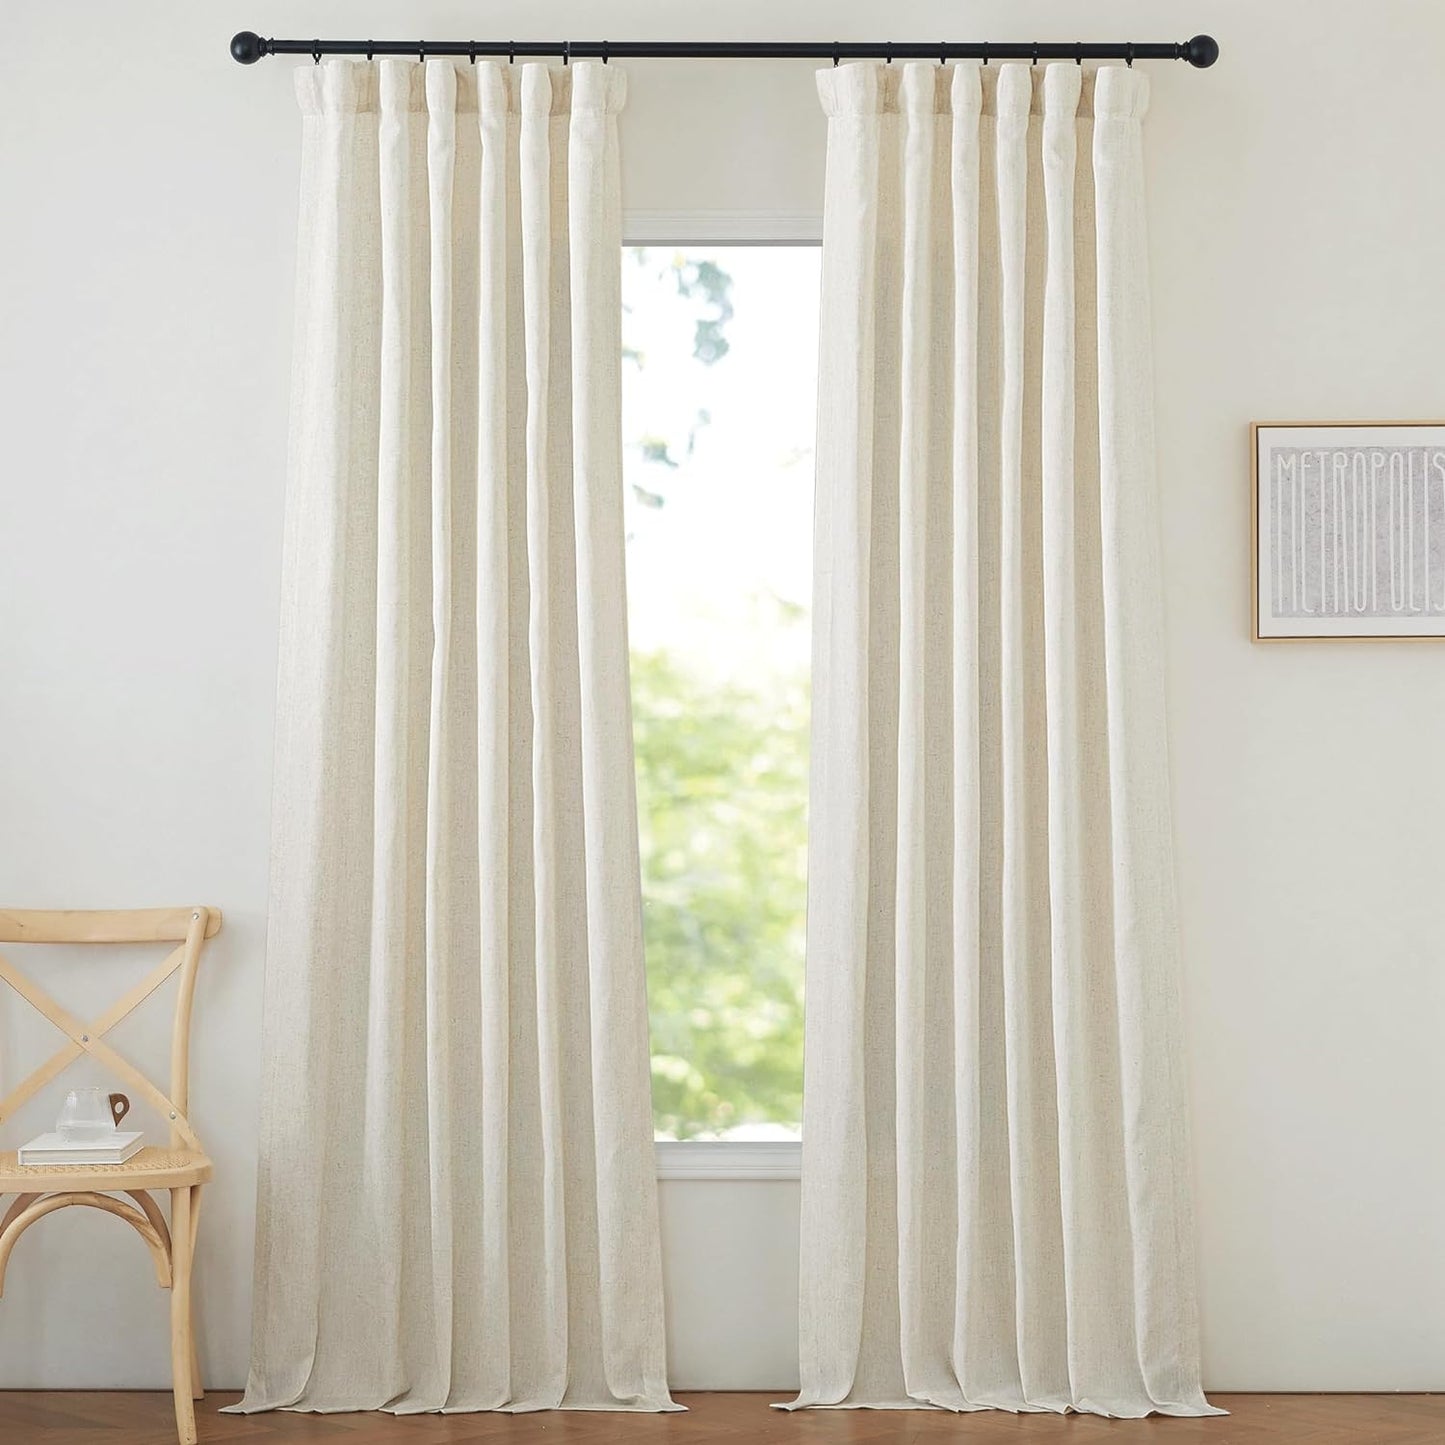 NICETOWN Taupe Thick Linen Curtains 96 Inches Long, Pinch Pleated Flax Linen Curtains Privacy Added Window Treatments with Light Filtering Drapes for Bedroom/Living Room, W50 X L96, 2 Panels  NICETOWN Natural W50 X L90 